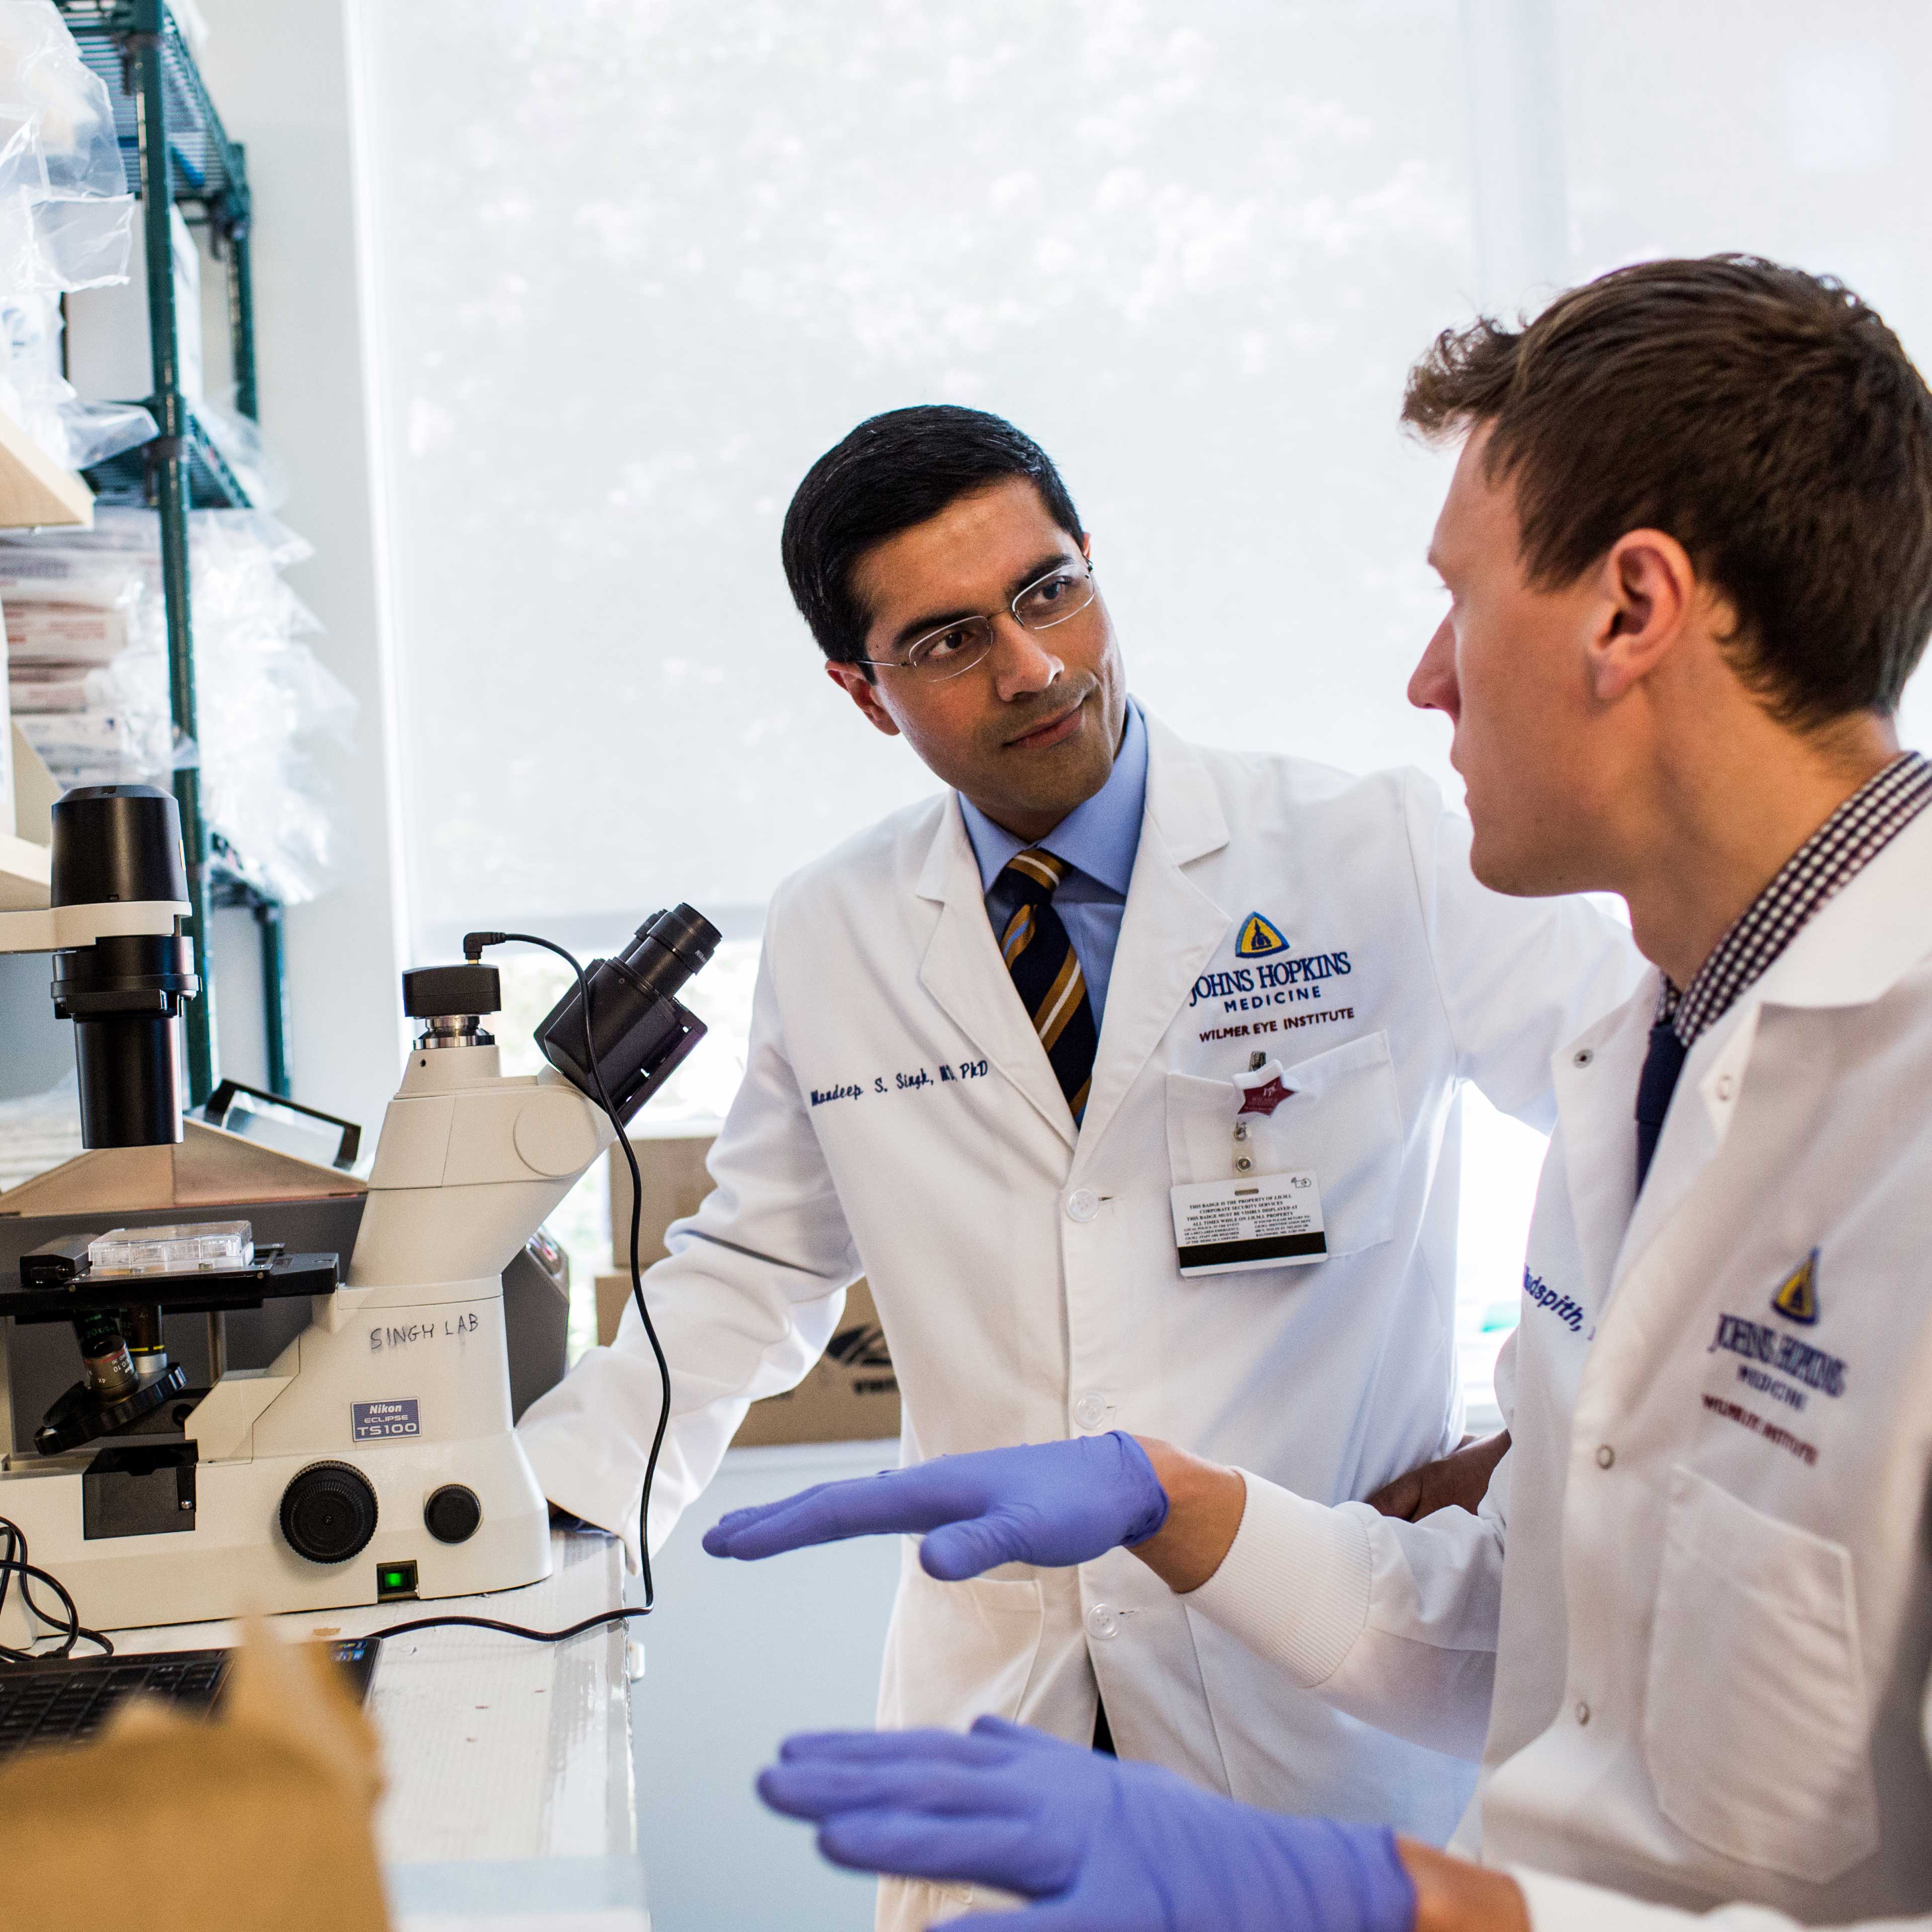 Dr. Mandeep Singh and Karl Hudspith discuss research in the Wilmer Eye Institute lab.